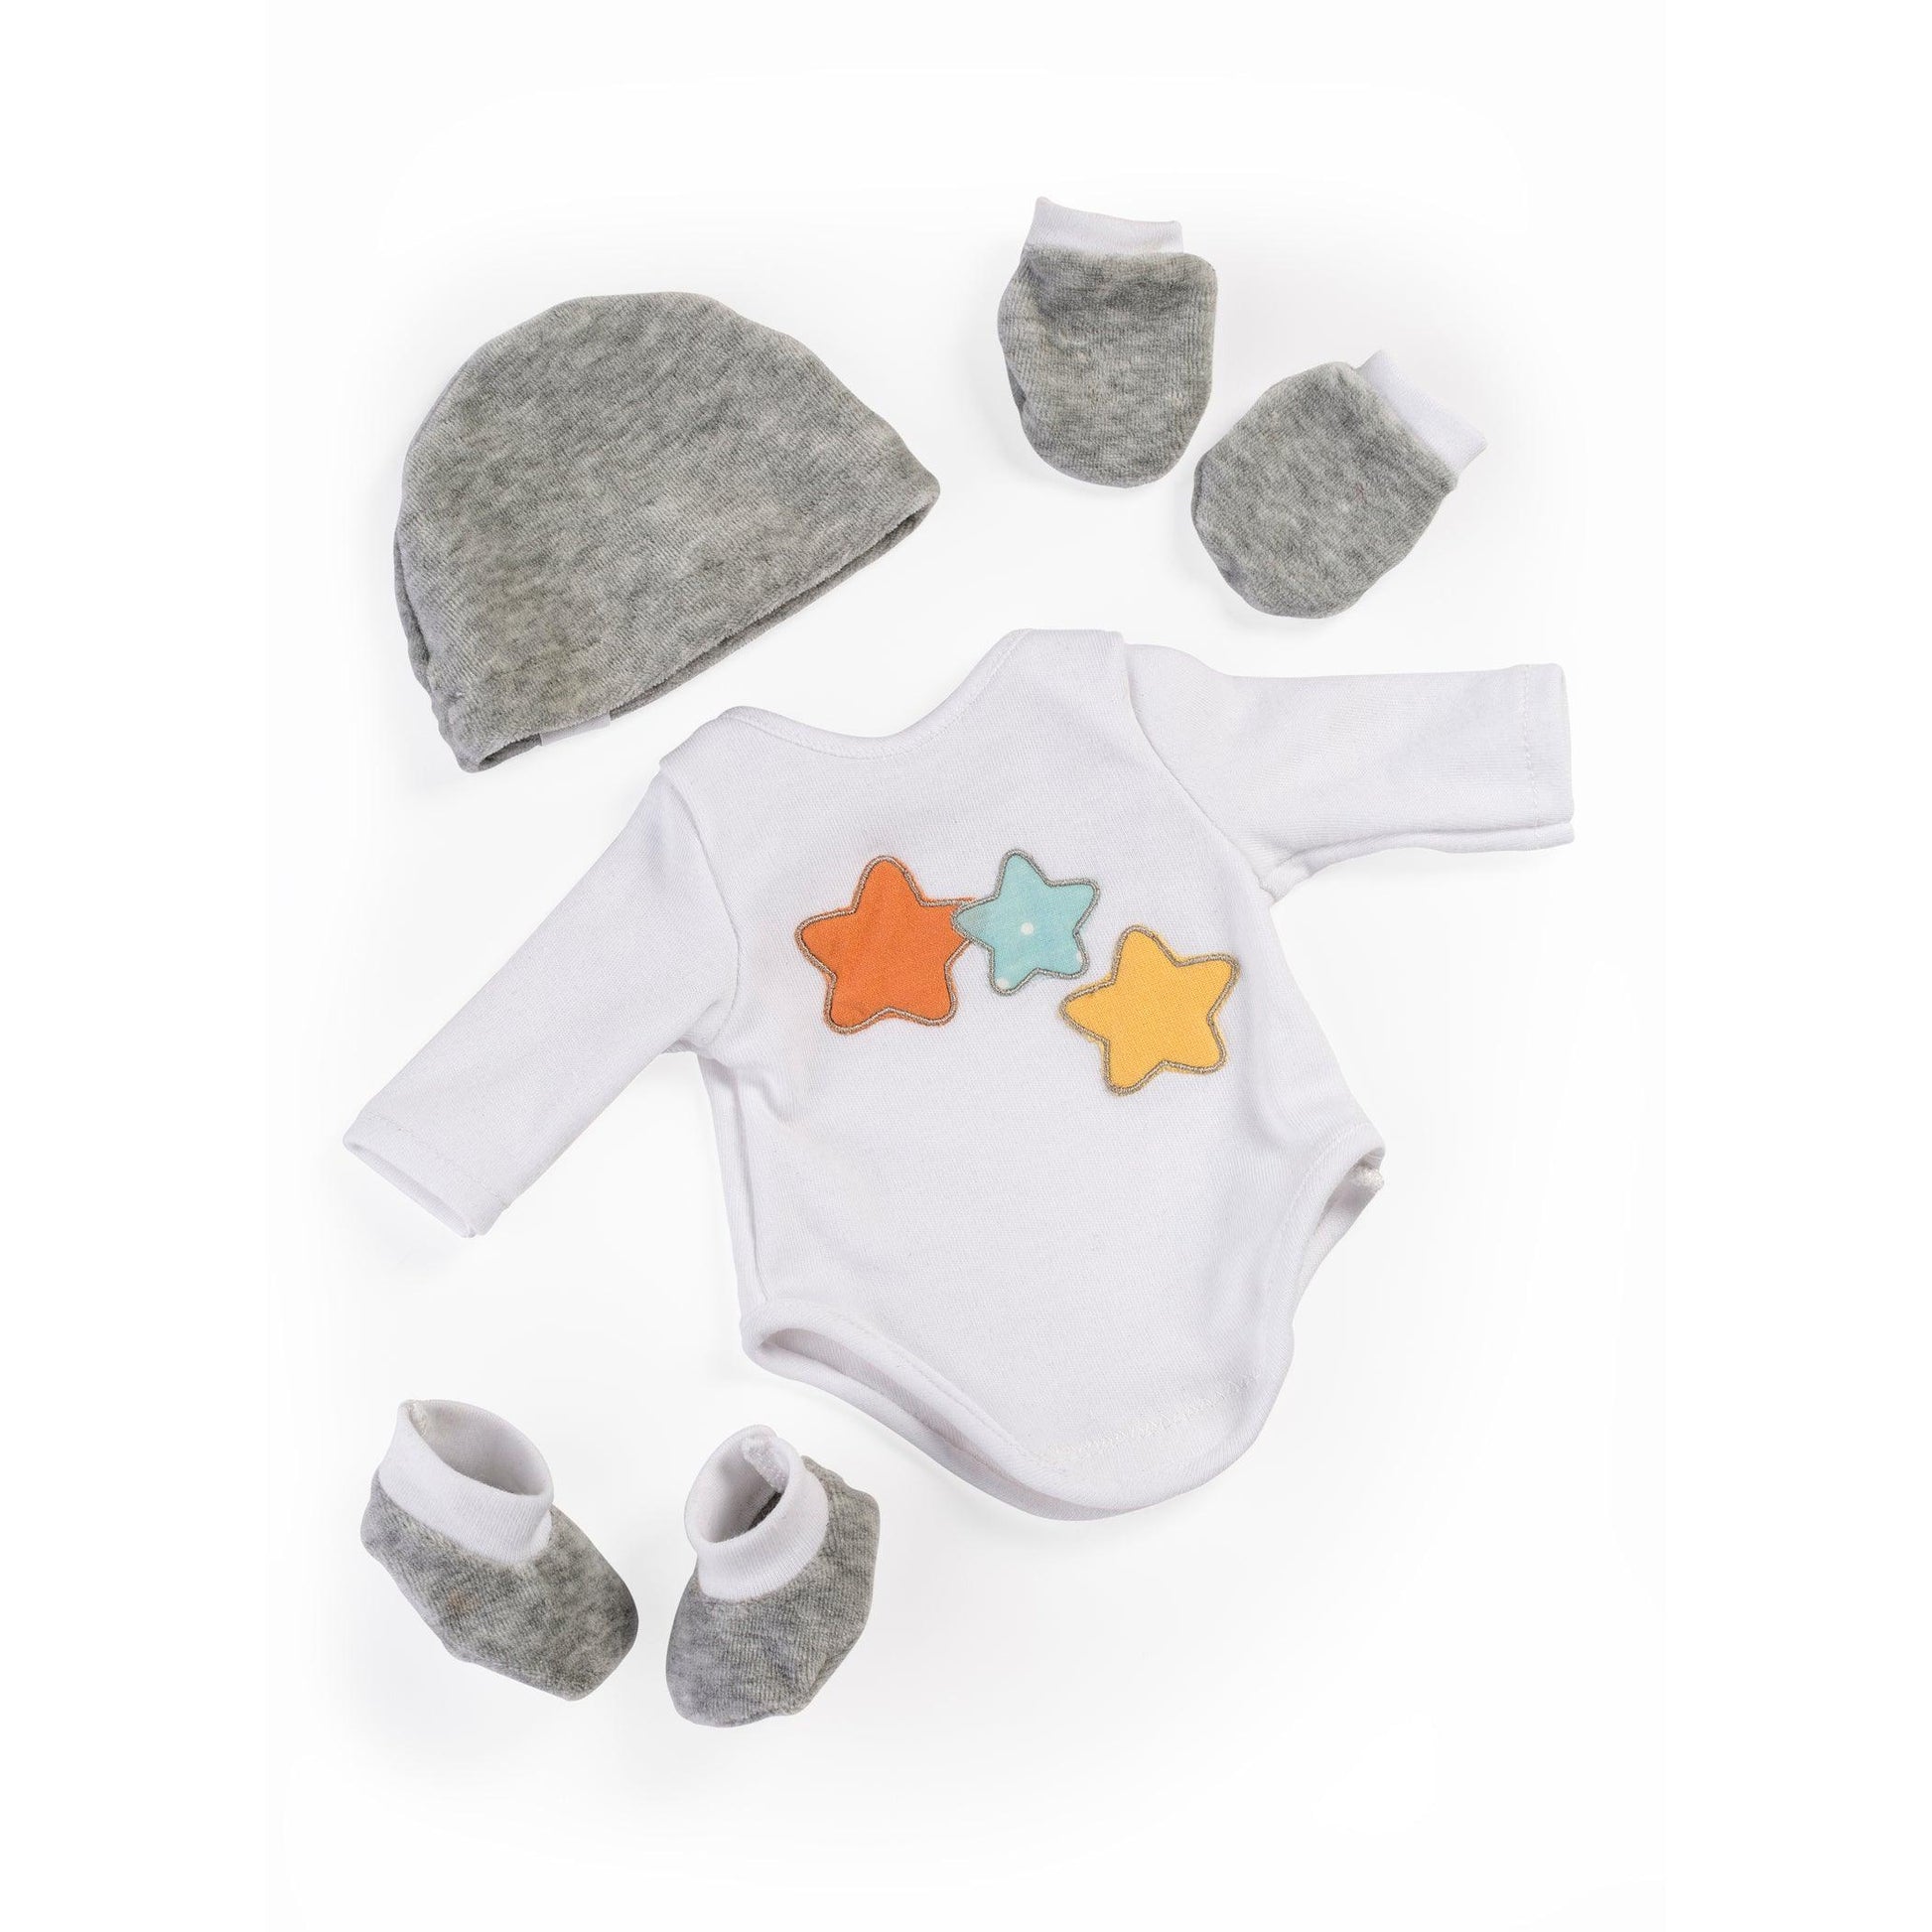 Gender Neutral Doll Layette Set for 15" Dolls - Loomini